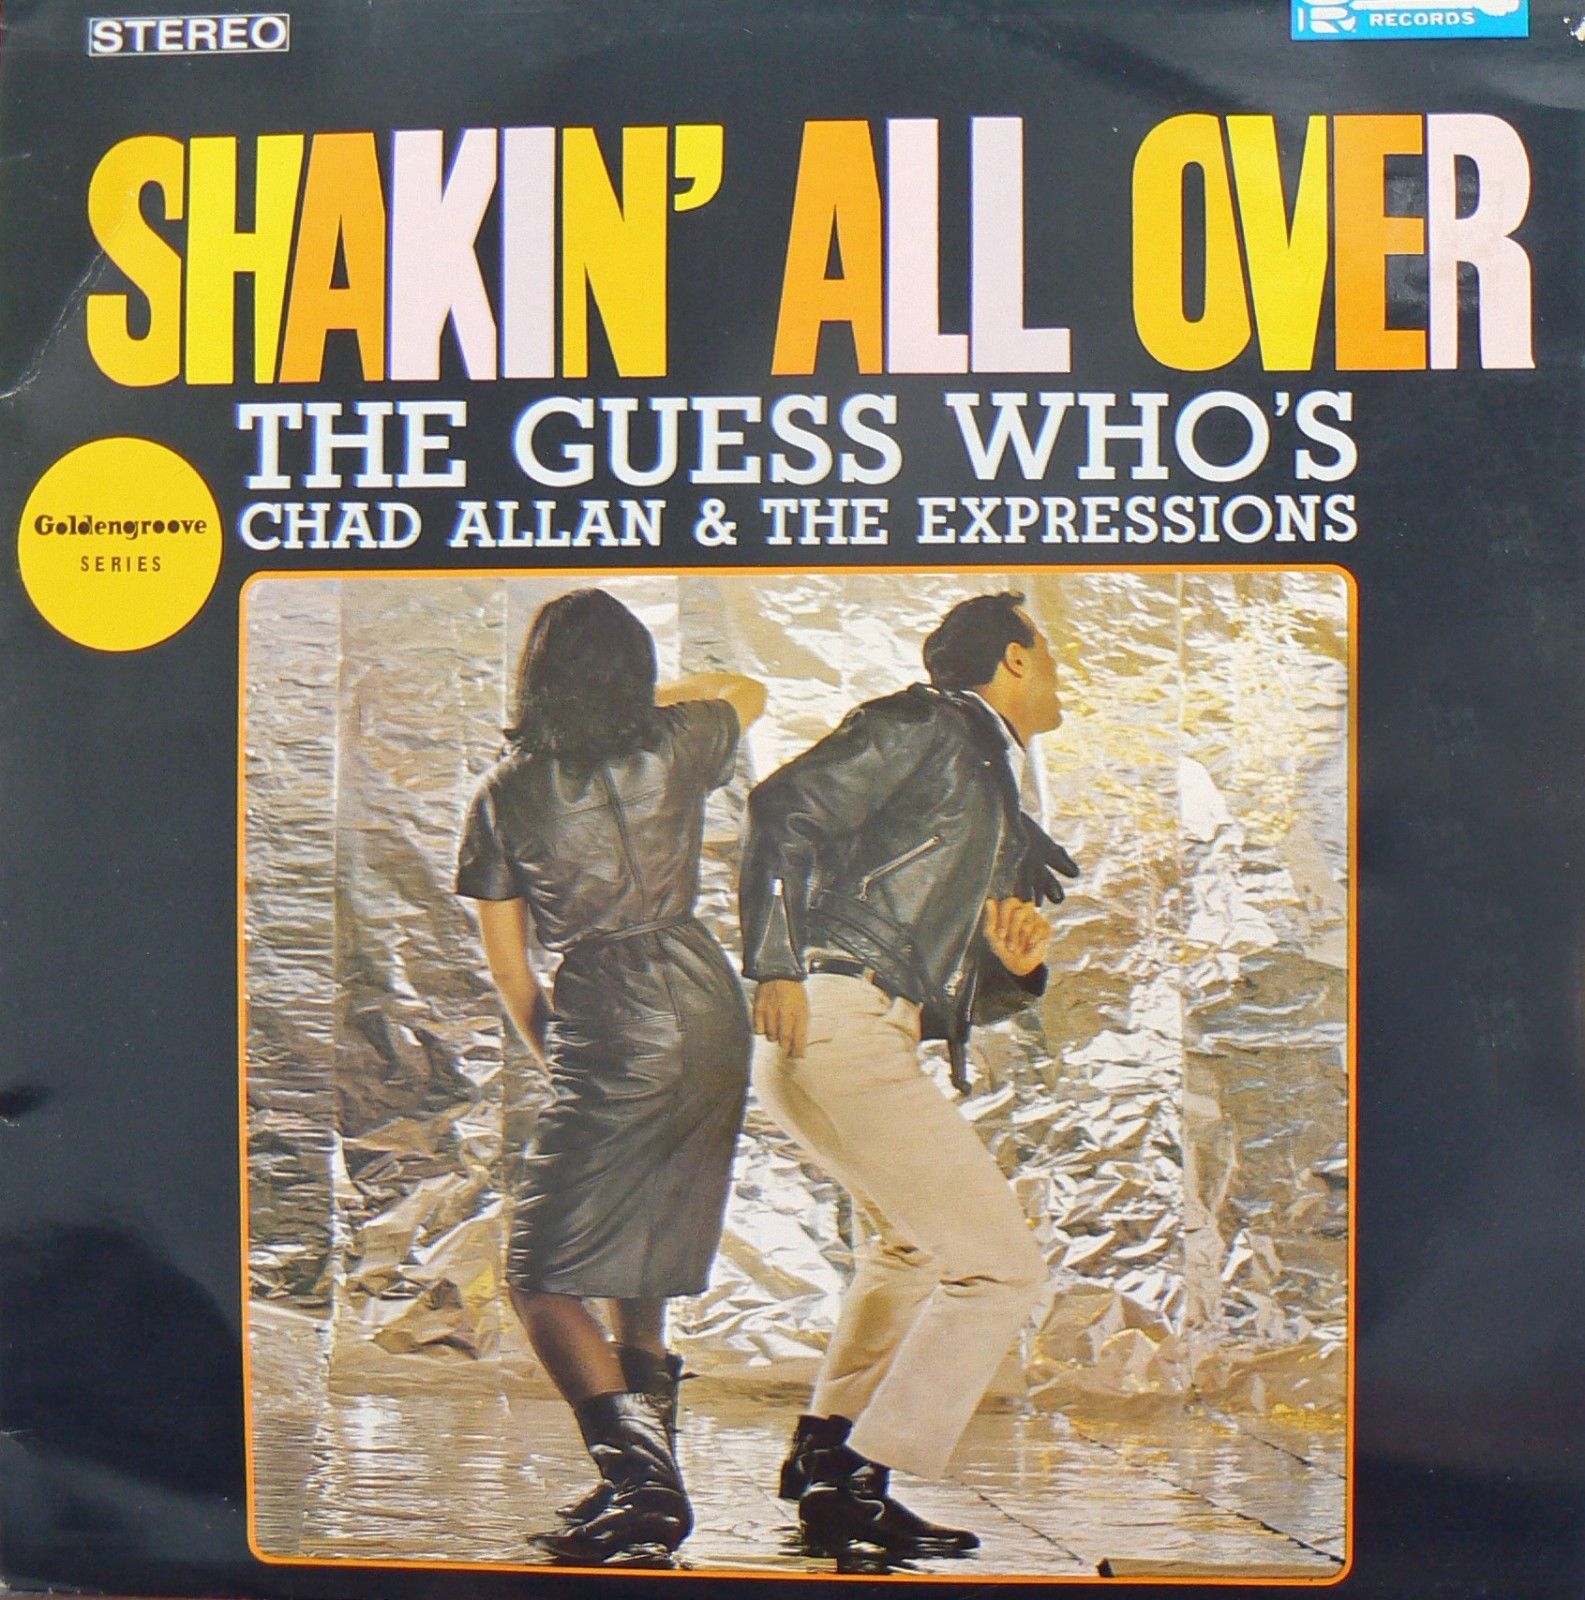 popsike.com - CHAD ALLAN & THE EXPRESSIONS Shakin' All Over LP Rock The Guess Who - auction details